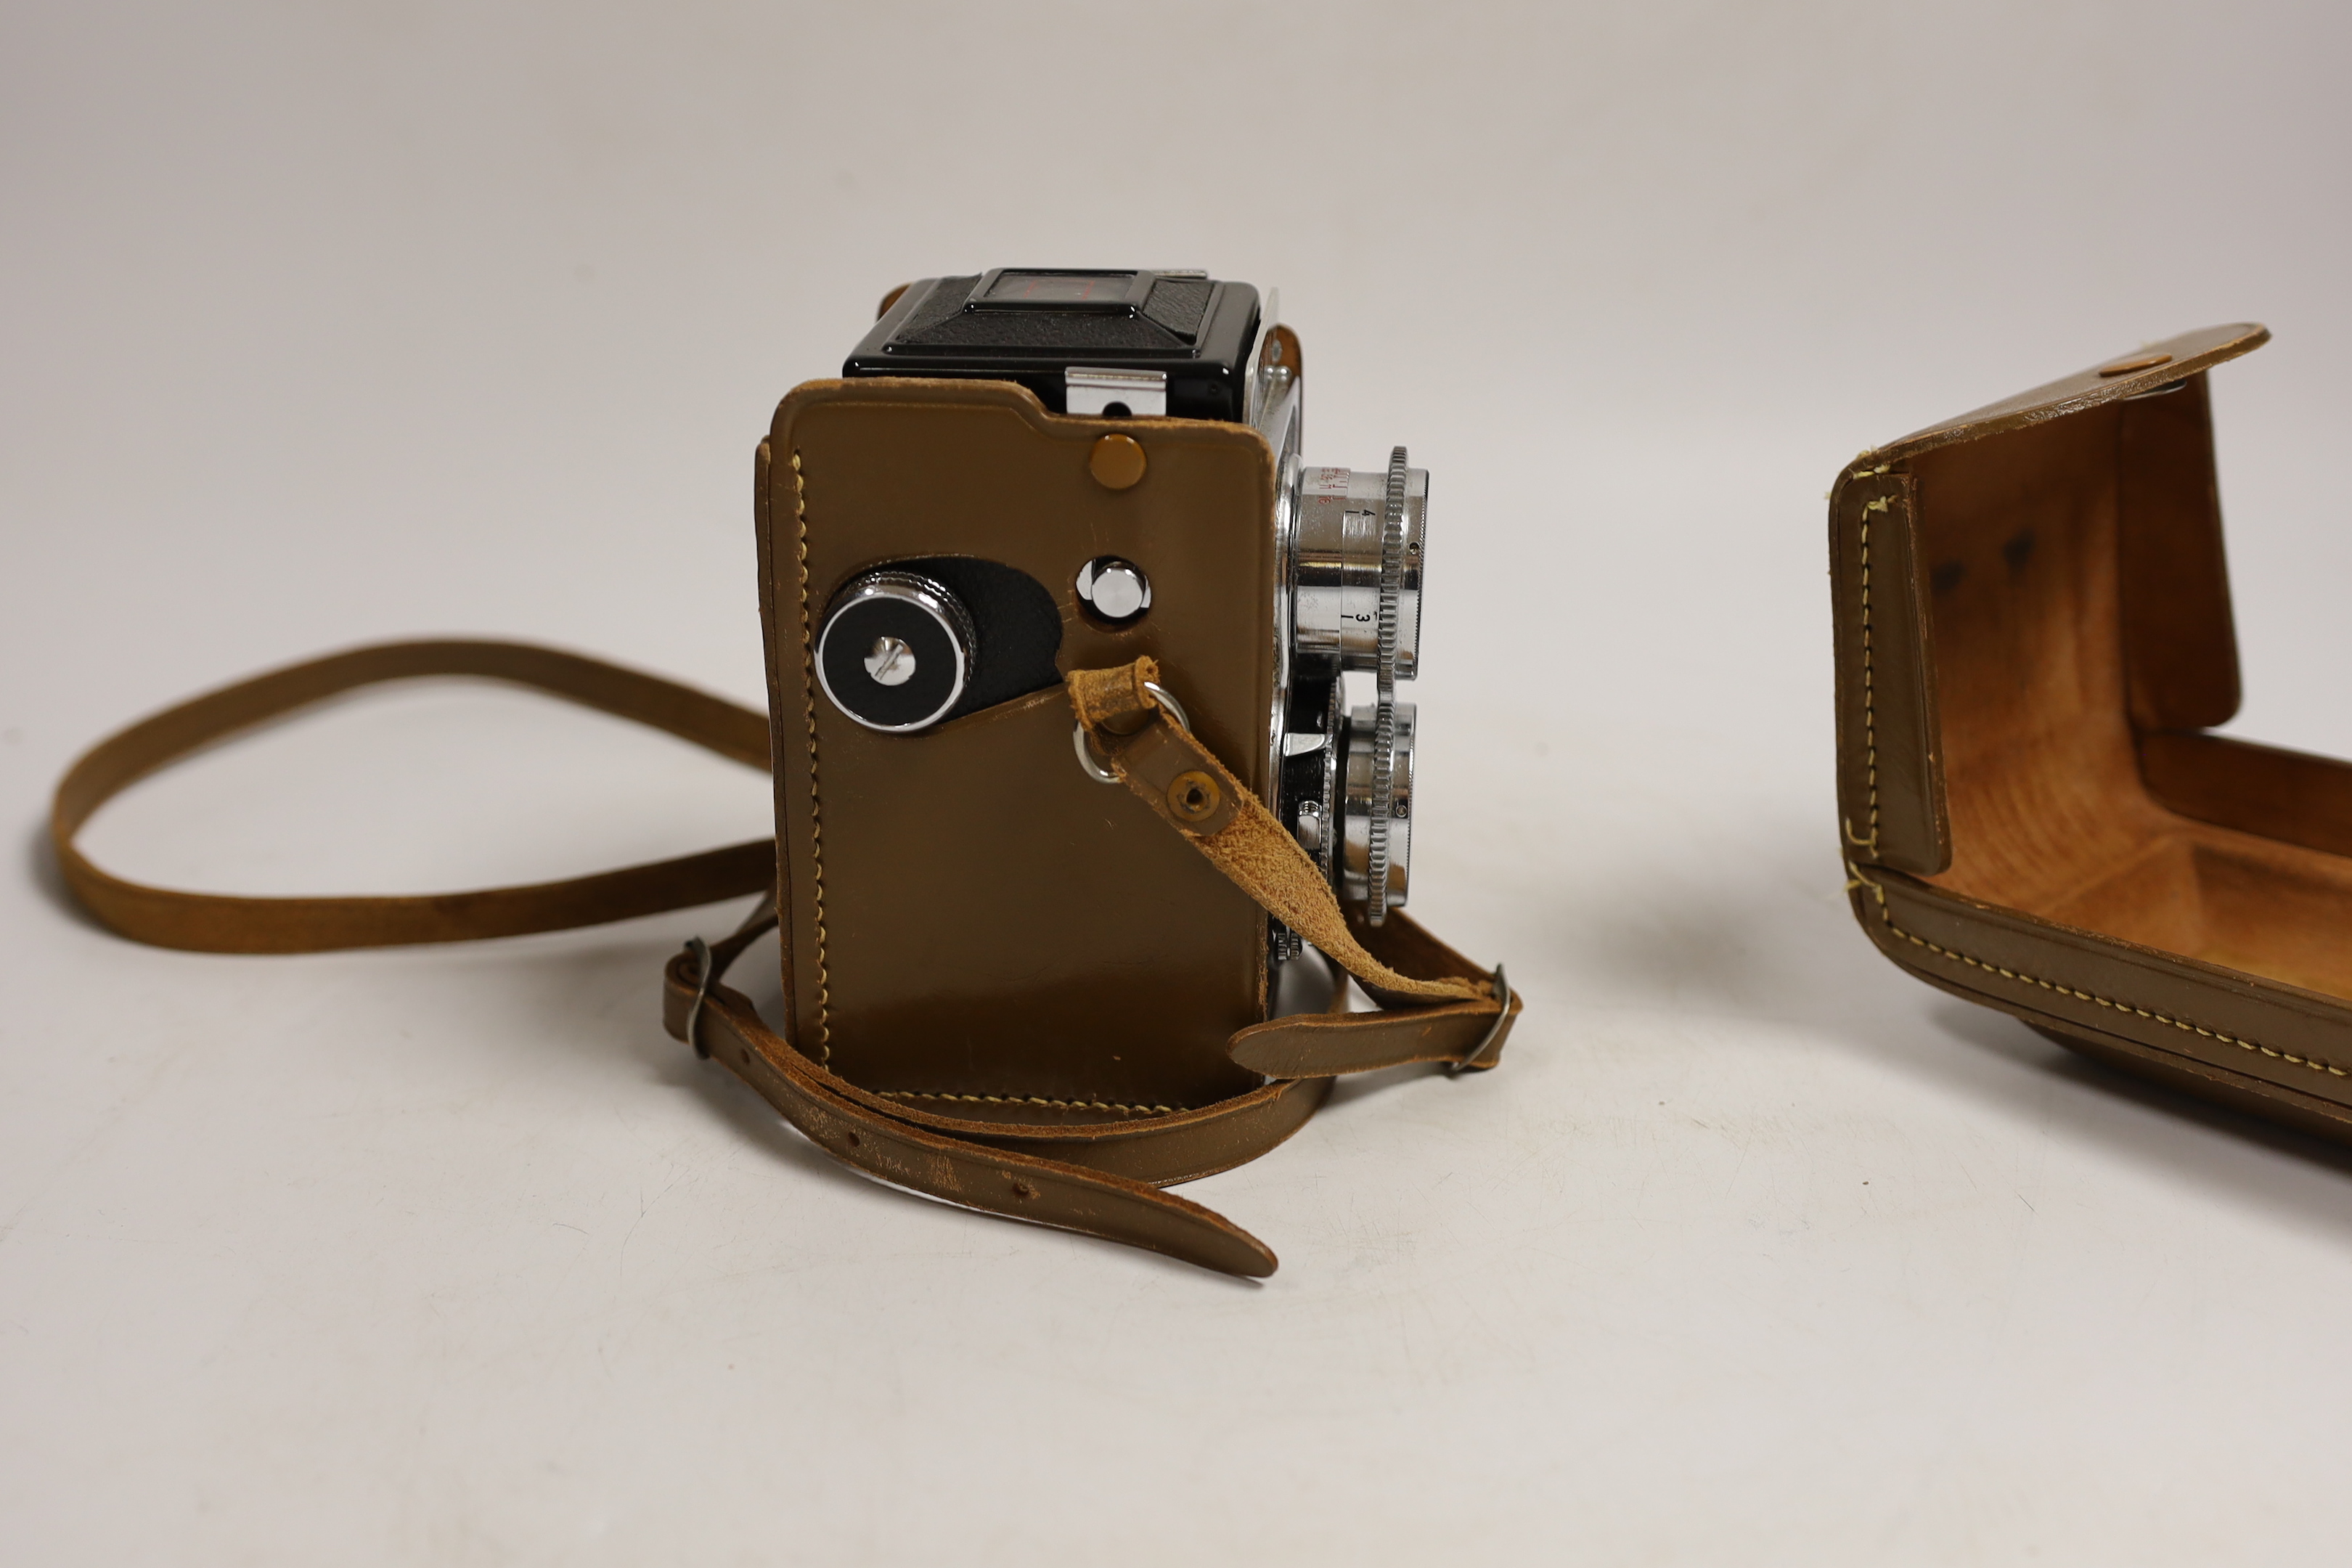 A Halina leather-cased camera, camera approx 14cm high